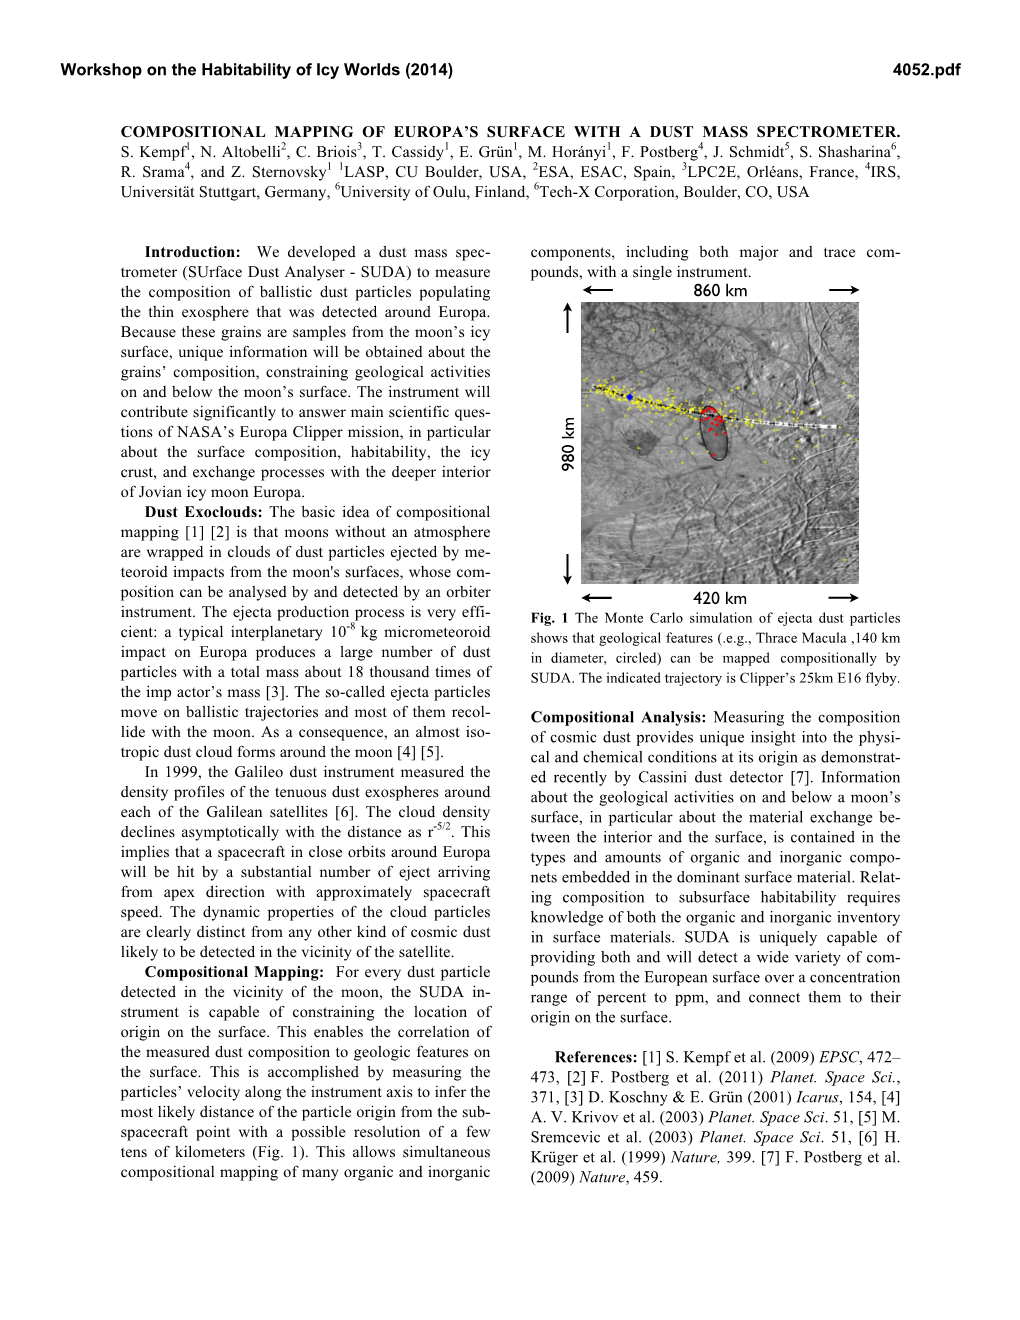 Compositional Mapping of Europa's Surface with a Dust Mass